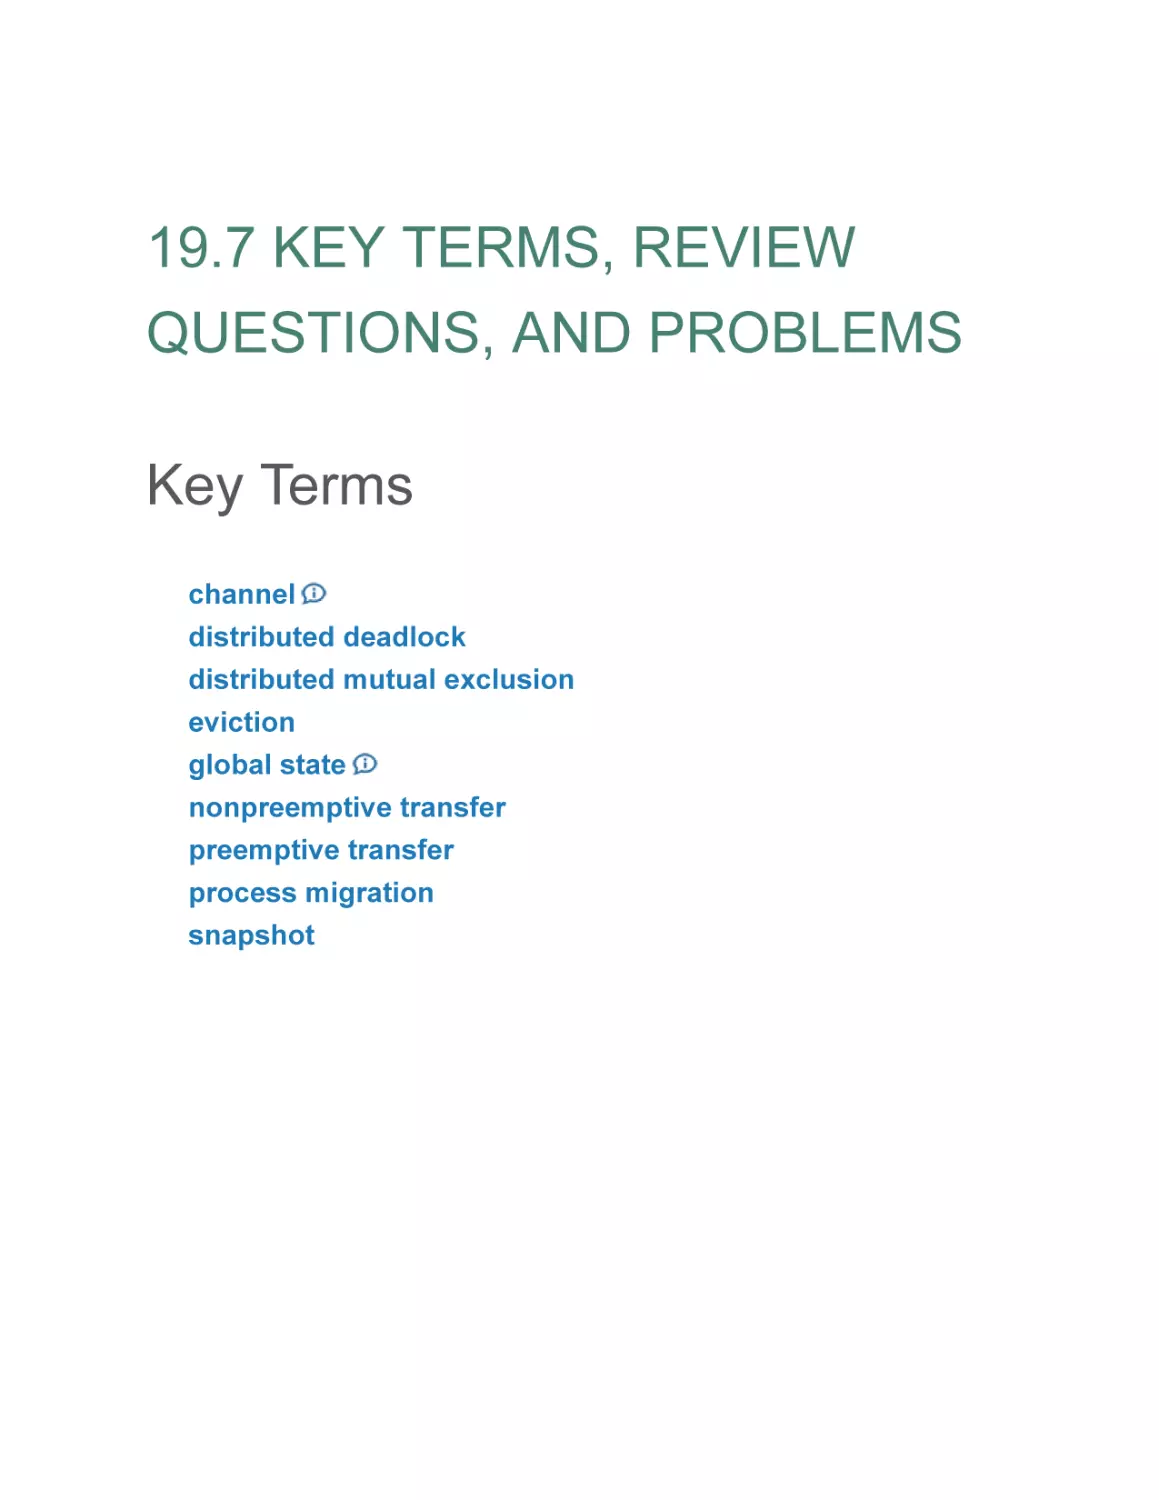 19.7 KEY TERMS, REVIEW QUESTIONS, AND PROBLEMS
Key Terms